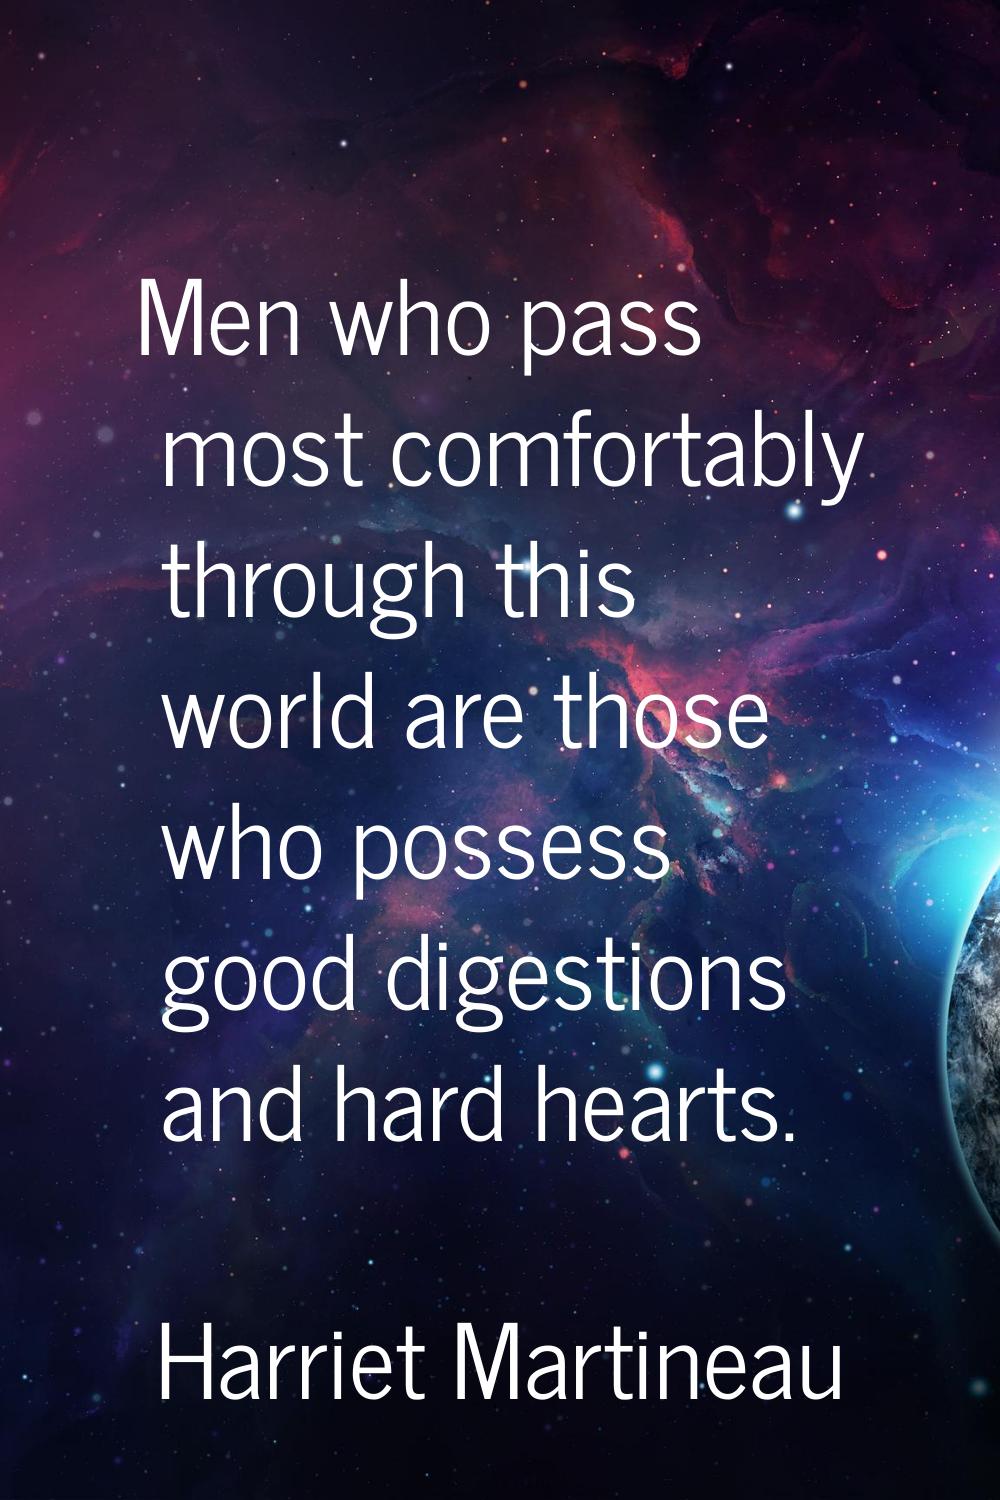 Men who pass most comfortably through this world are those who possess good digestions and hard hea